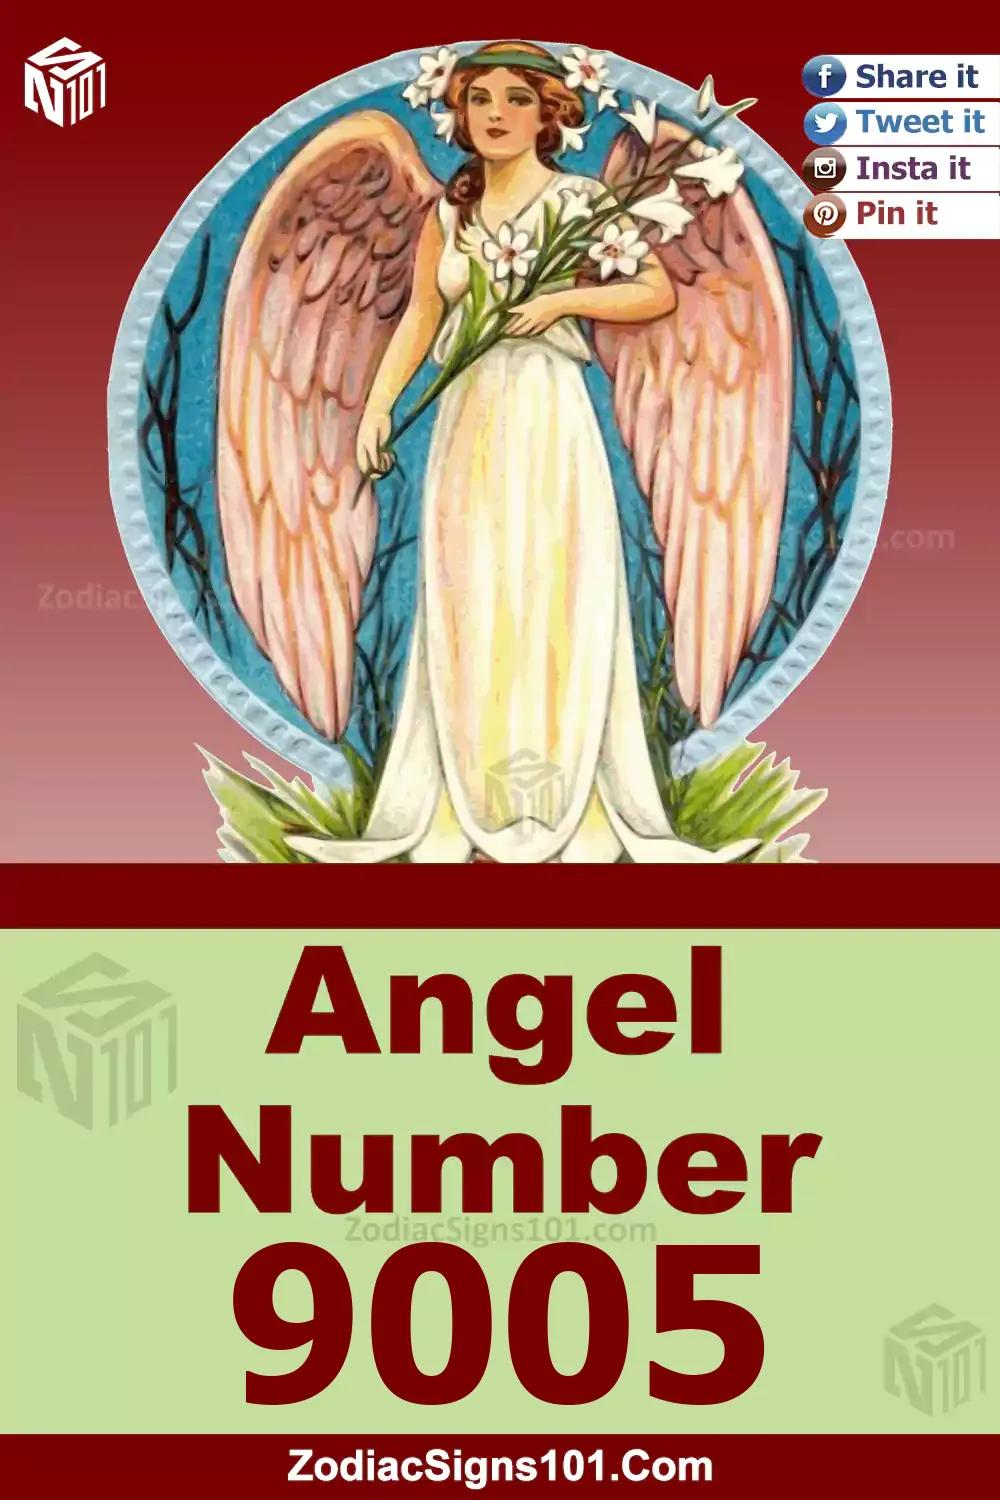 9005 Angel Number Meaning